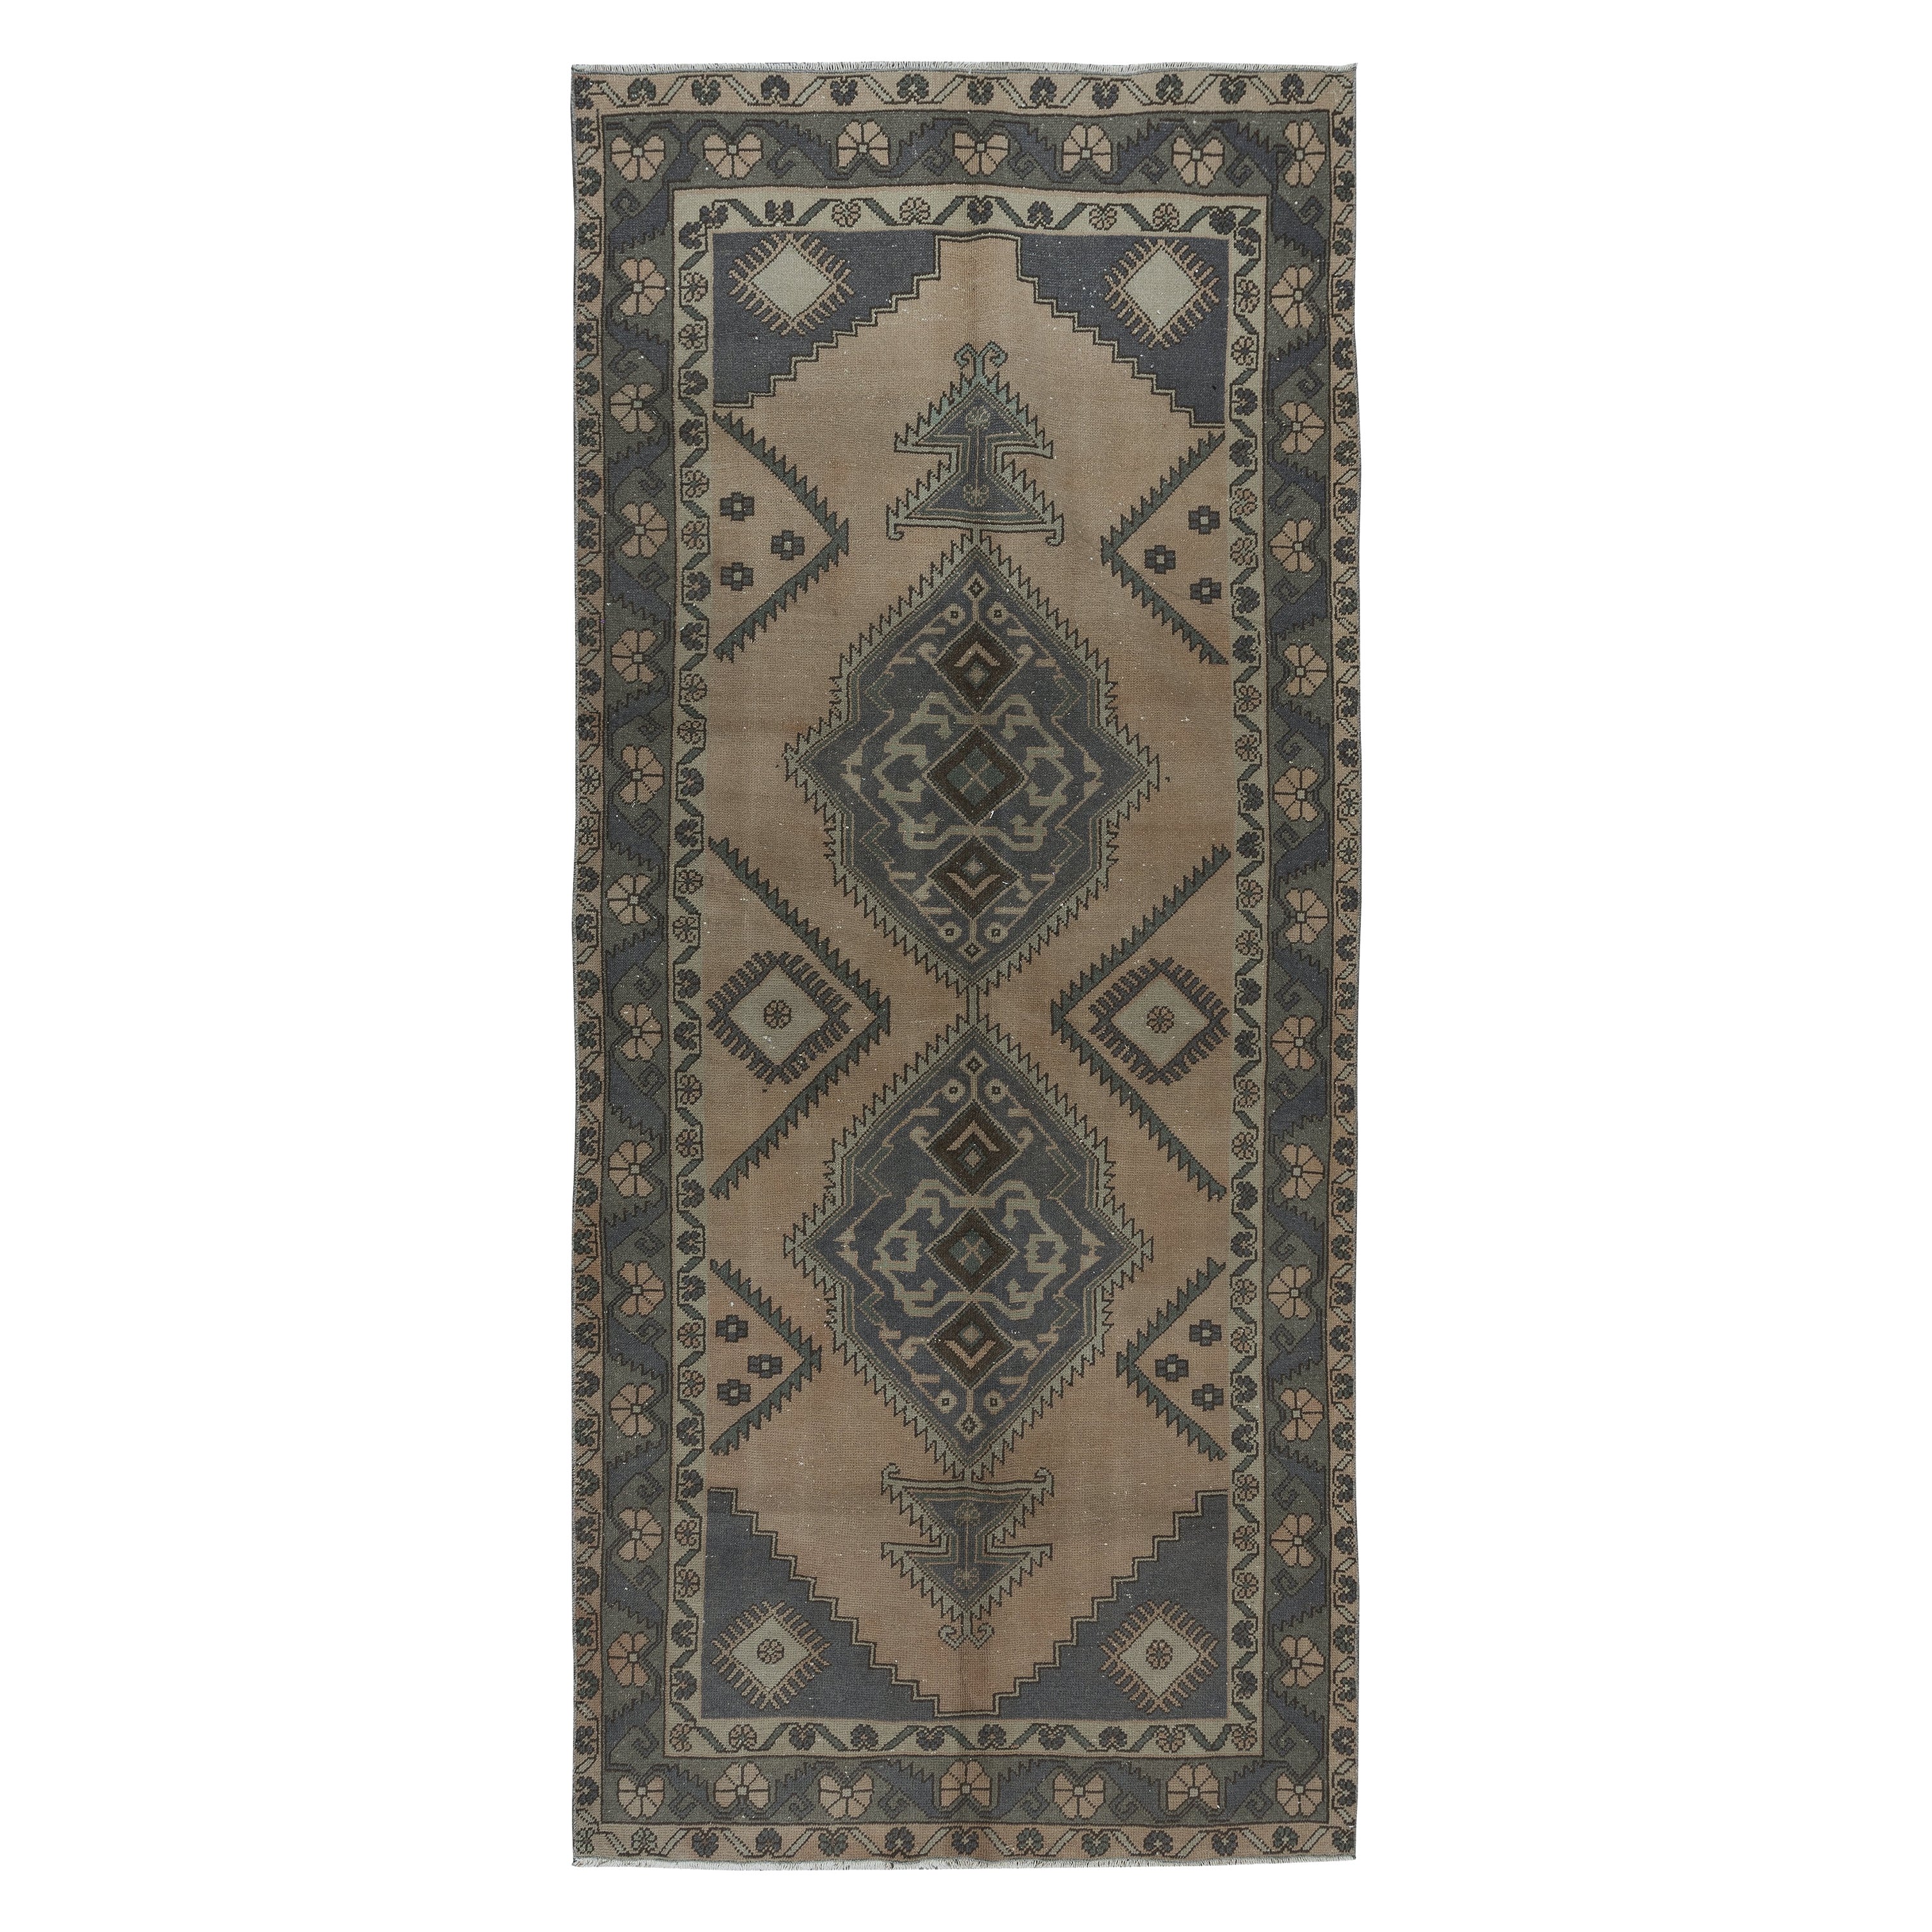 4.6x10.5 Ft Old Handmade Corridor Rug with Medallions, Wide Hallway Runner For Sale